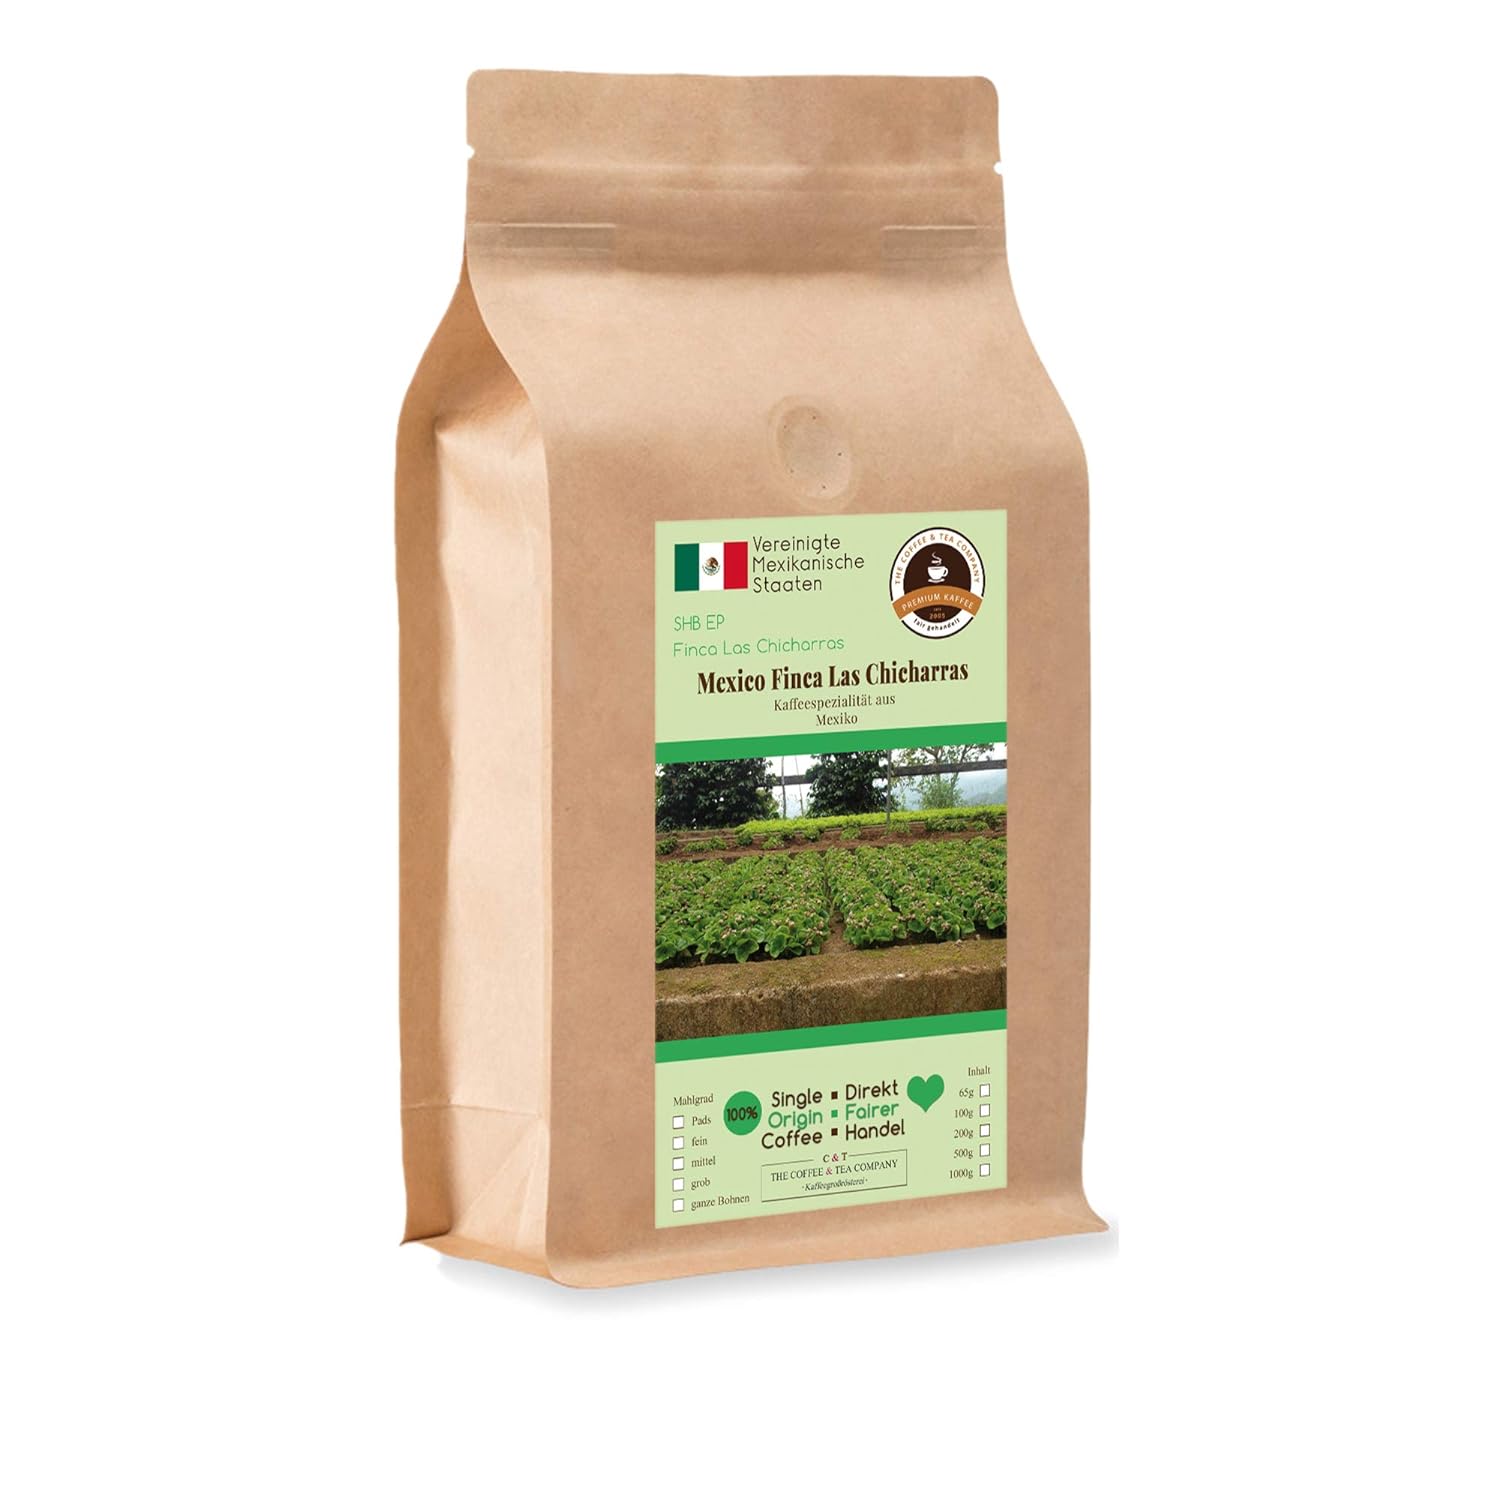 Coffee Globetrotter - Coffee with Heart - Mexico Finca Las Chicharras - 200 g Whole Bean - for Fully Automatic Coffee - Top Coffee from Mexico Fair Trade Supports Social Projects